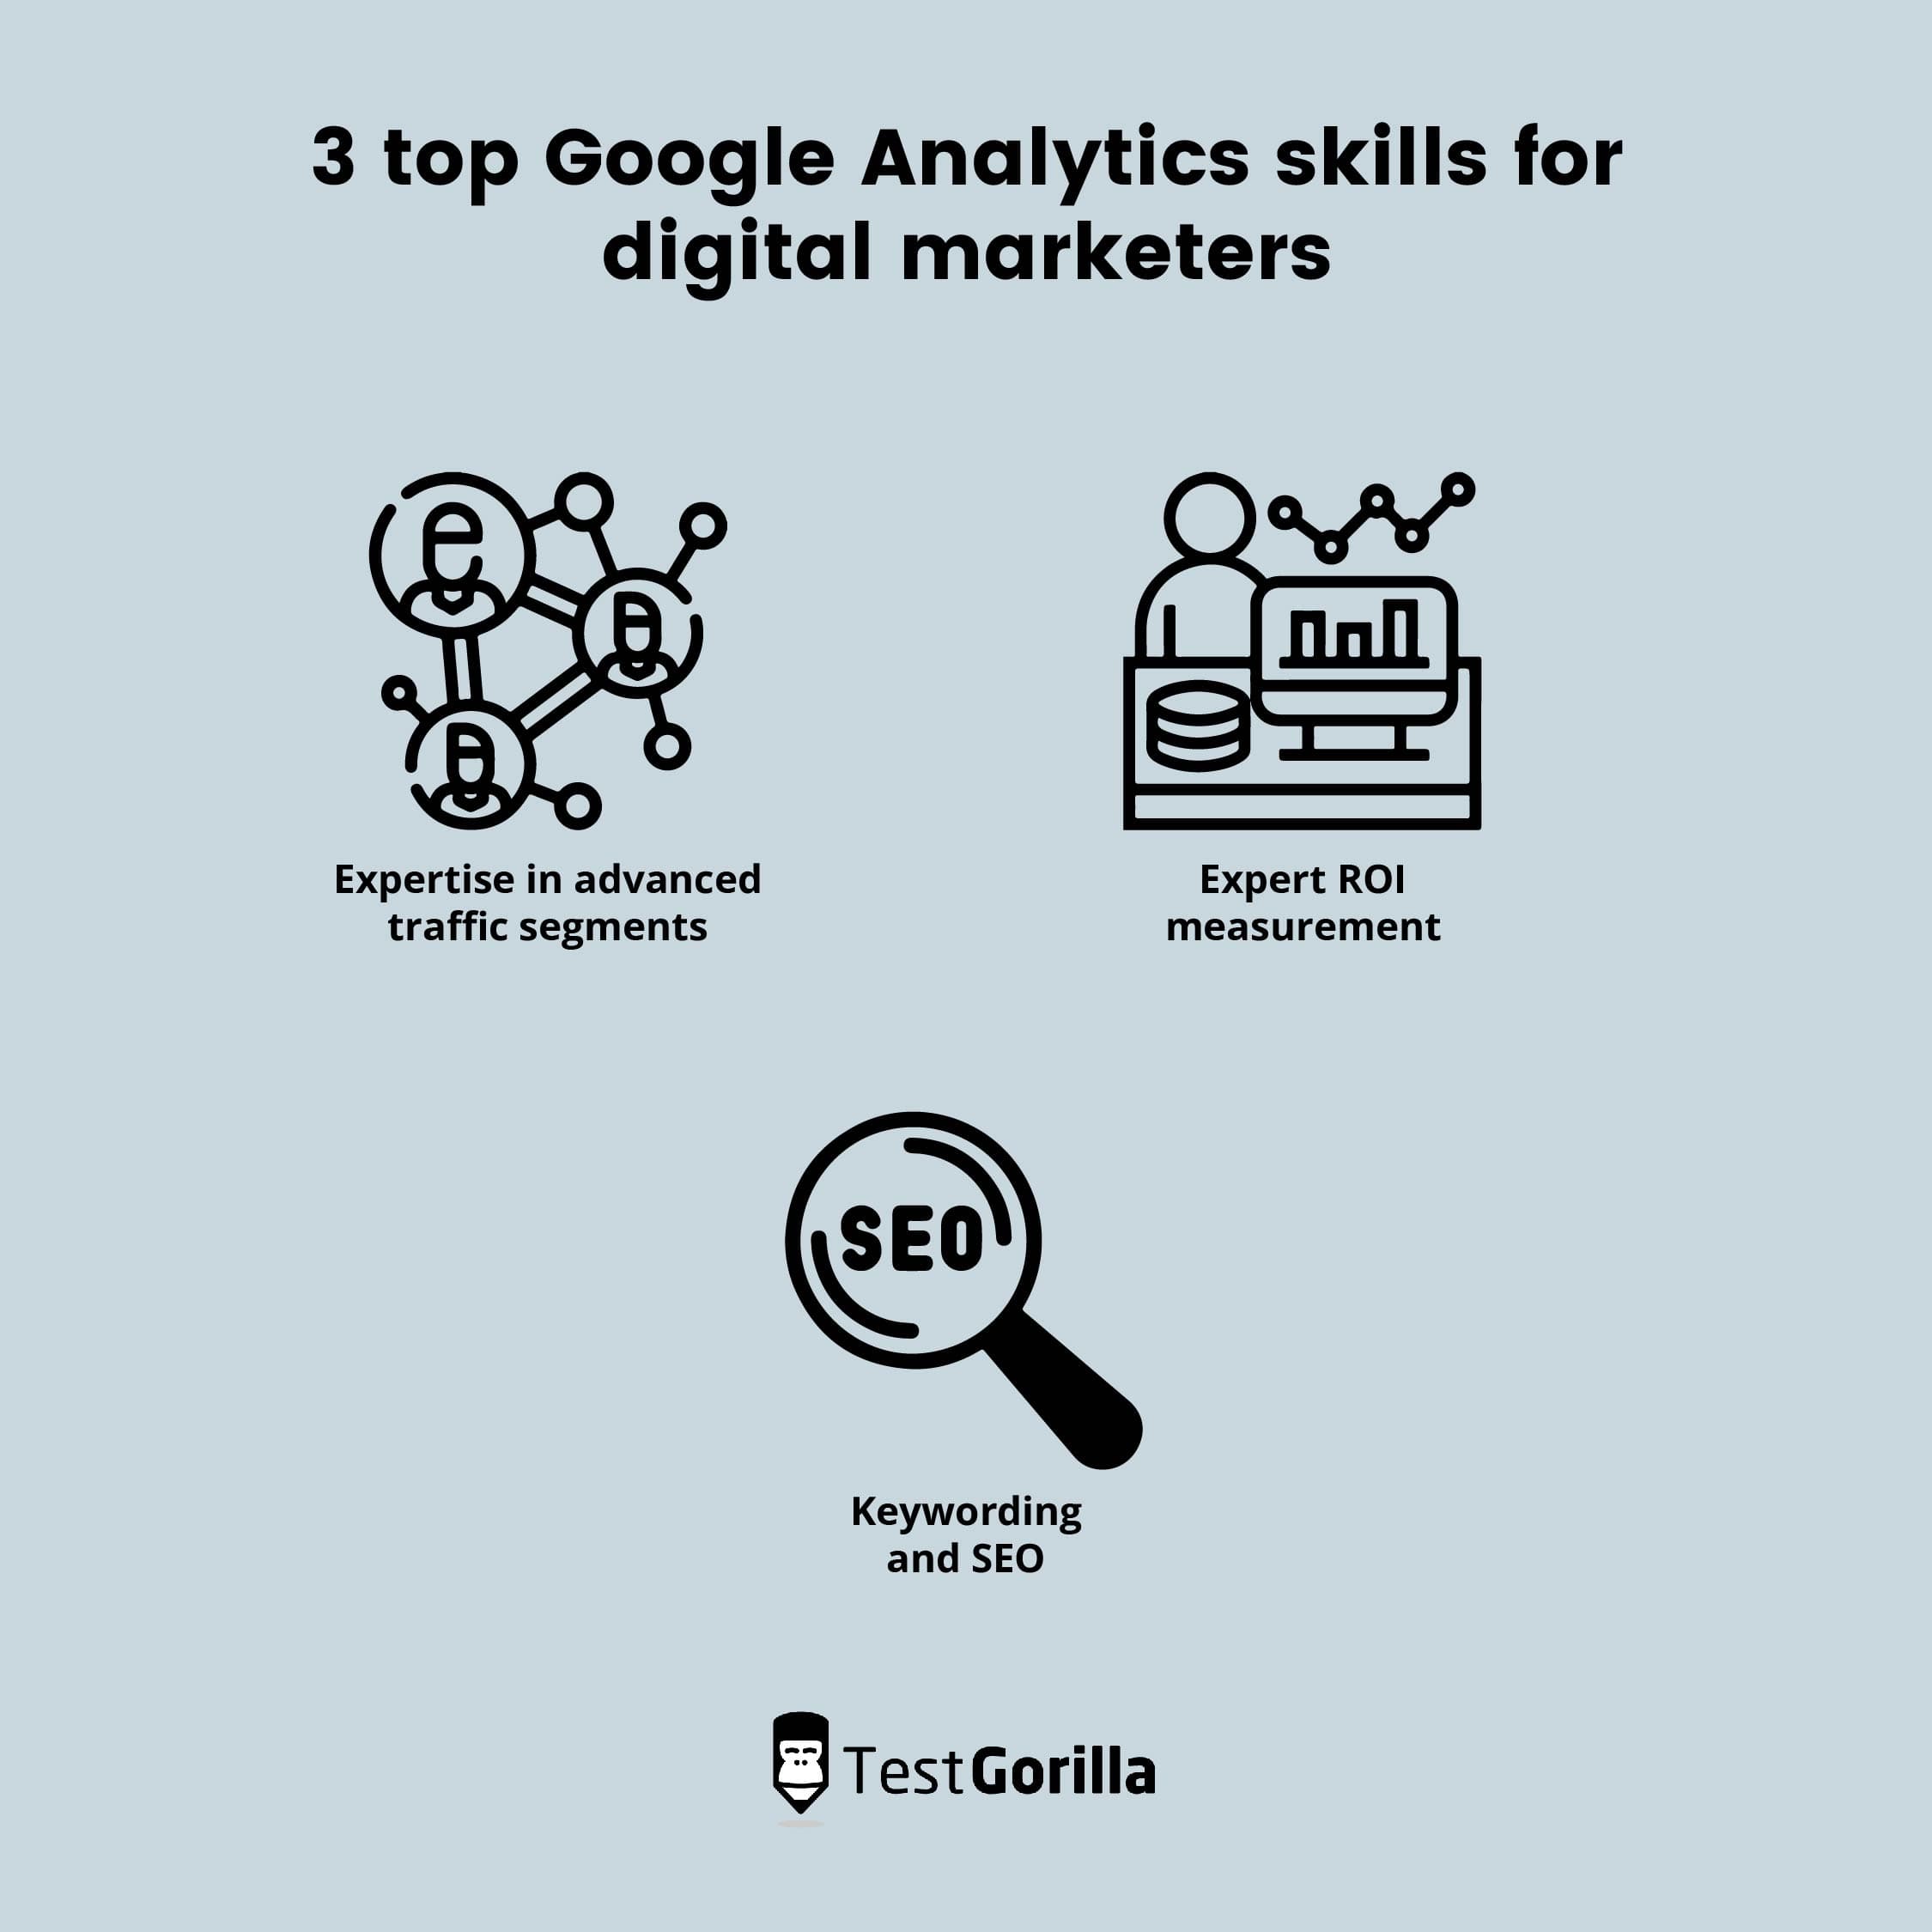 The 3 top Google Analytics skills for digital marketers